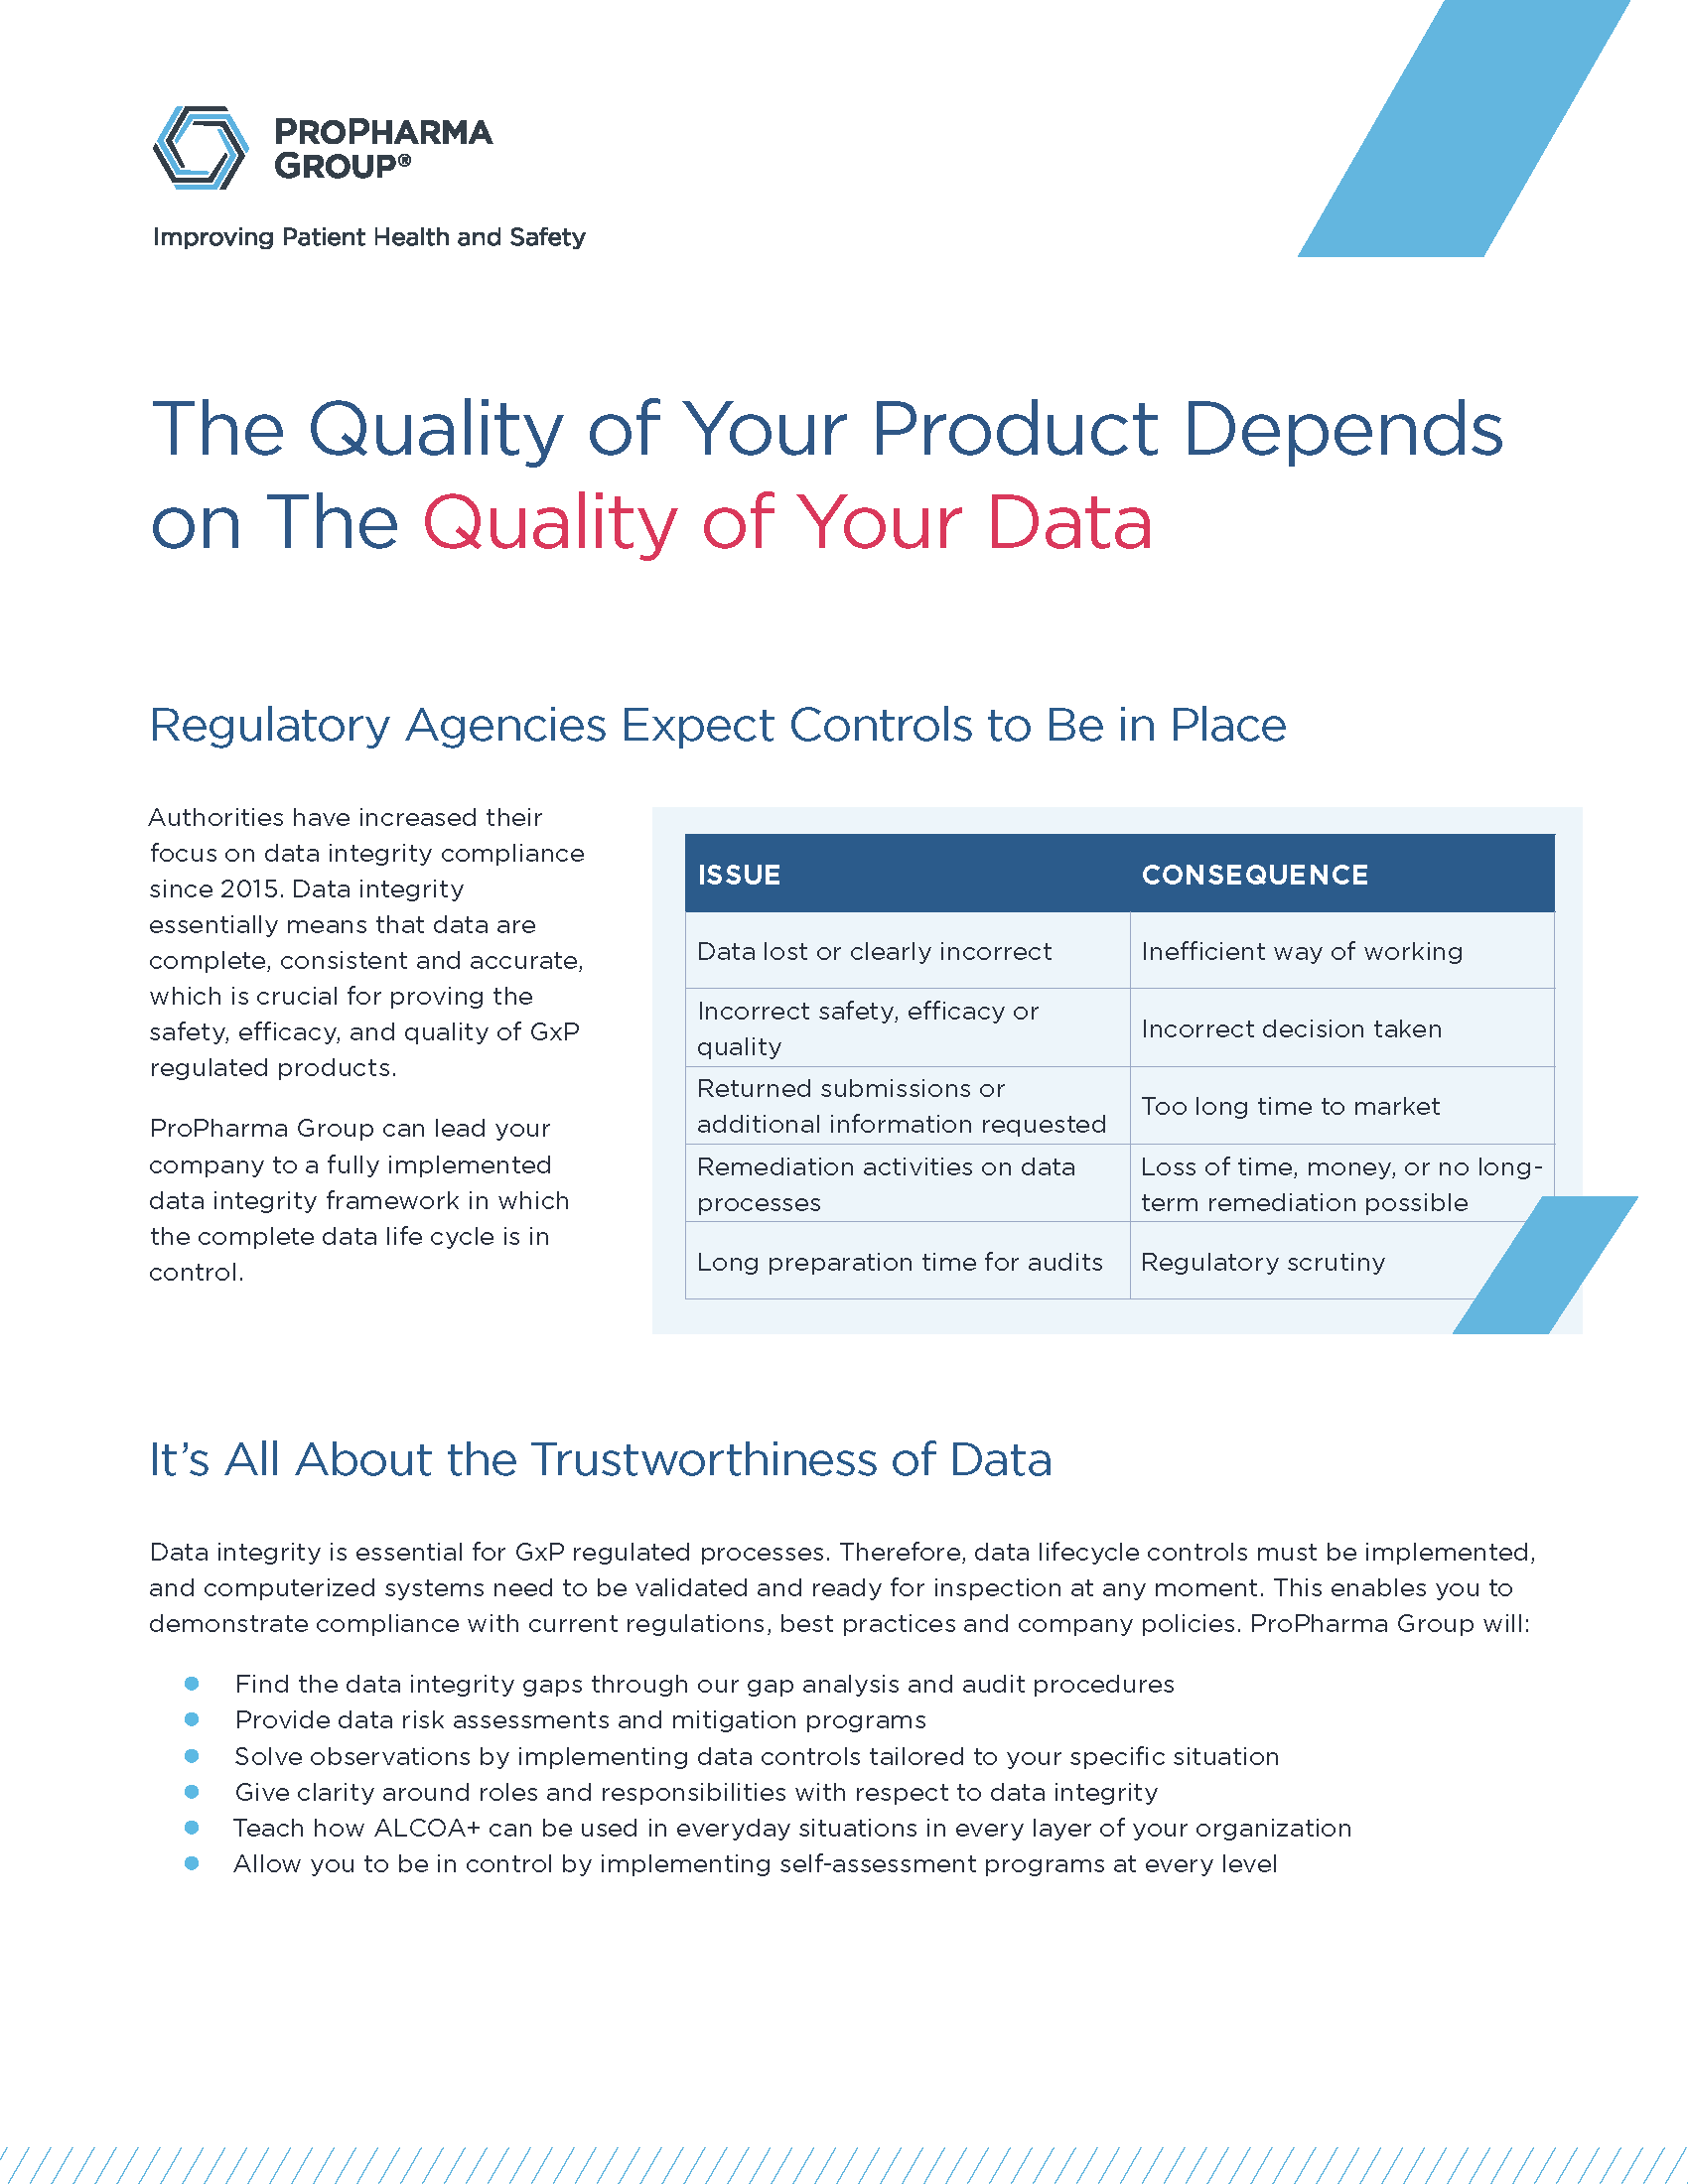 Data Integrity: The Quality of Your Product Depends on The Quality of Your Data - ProPharma